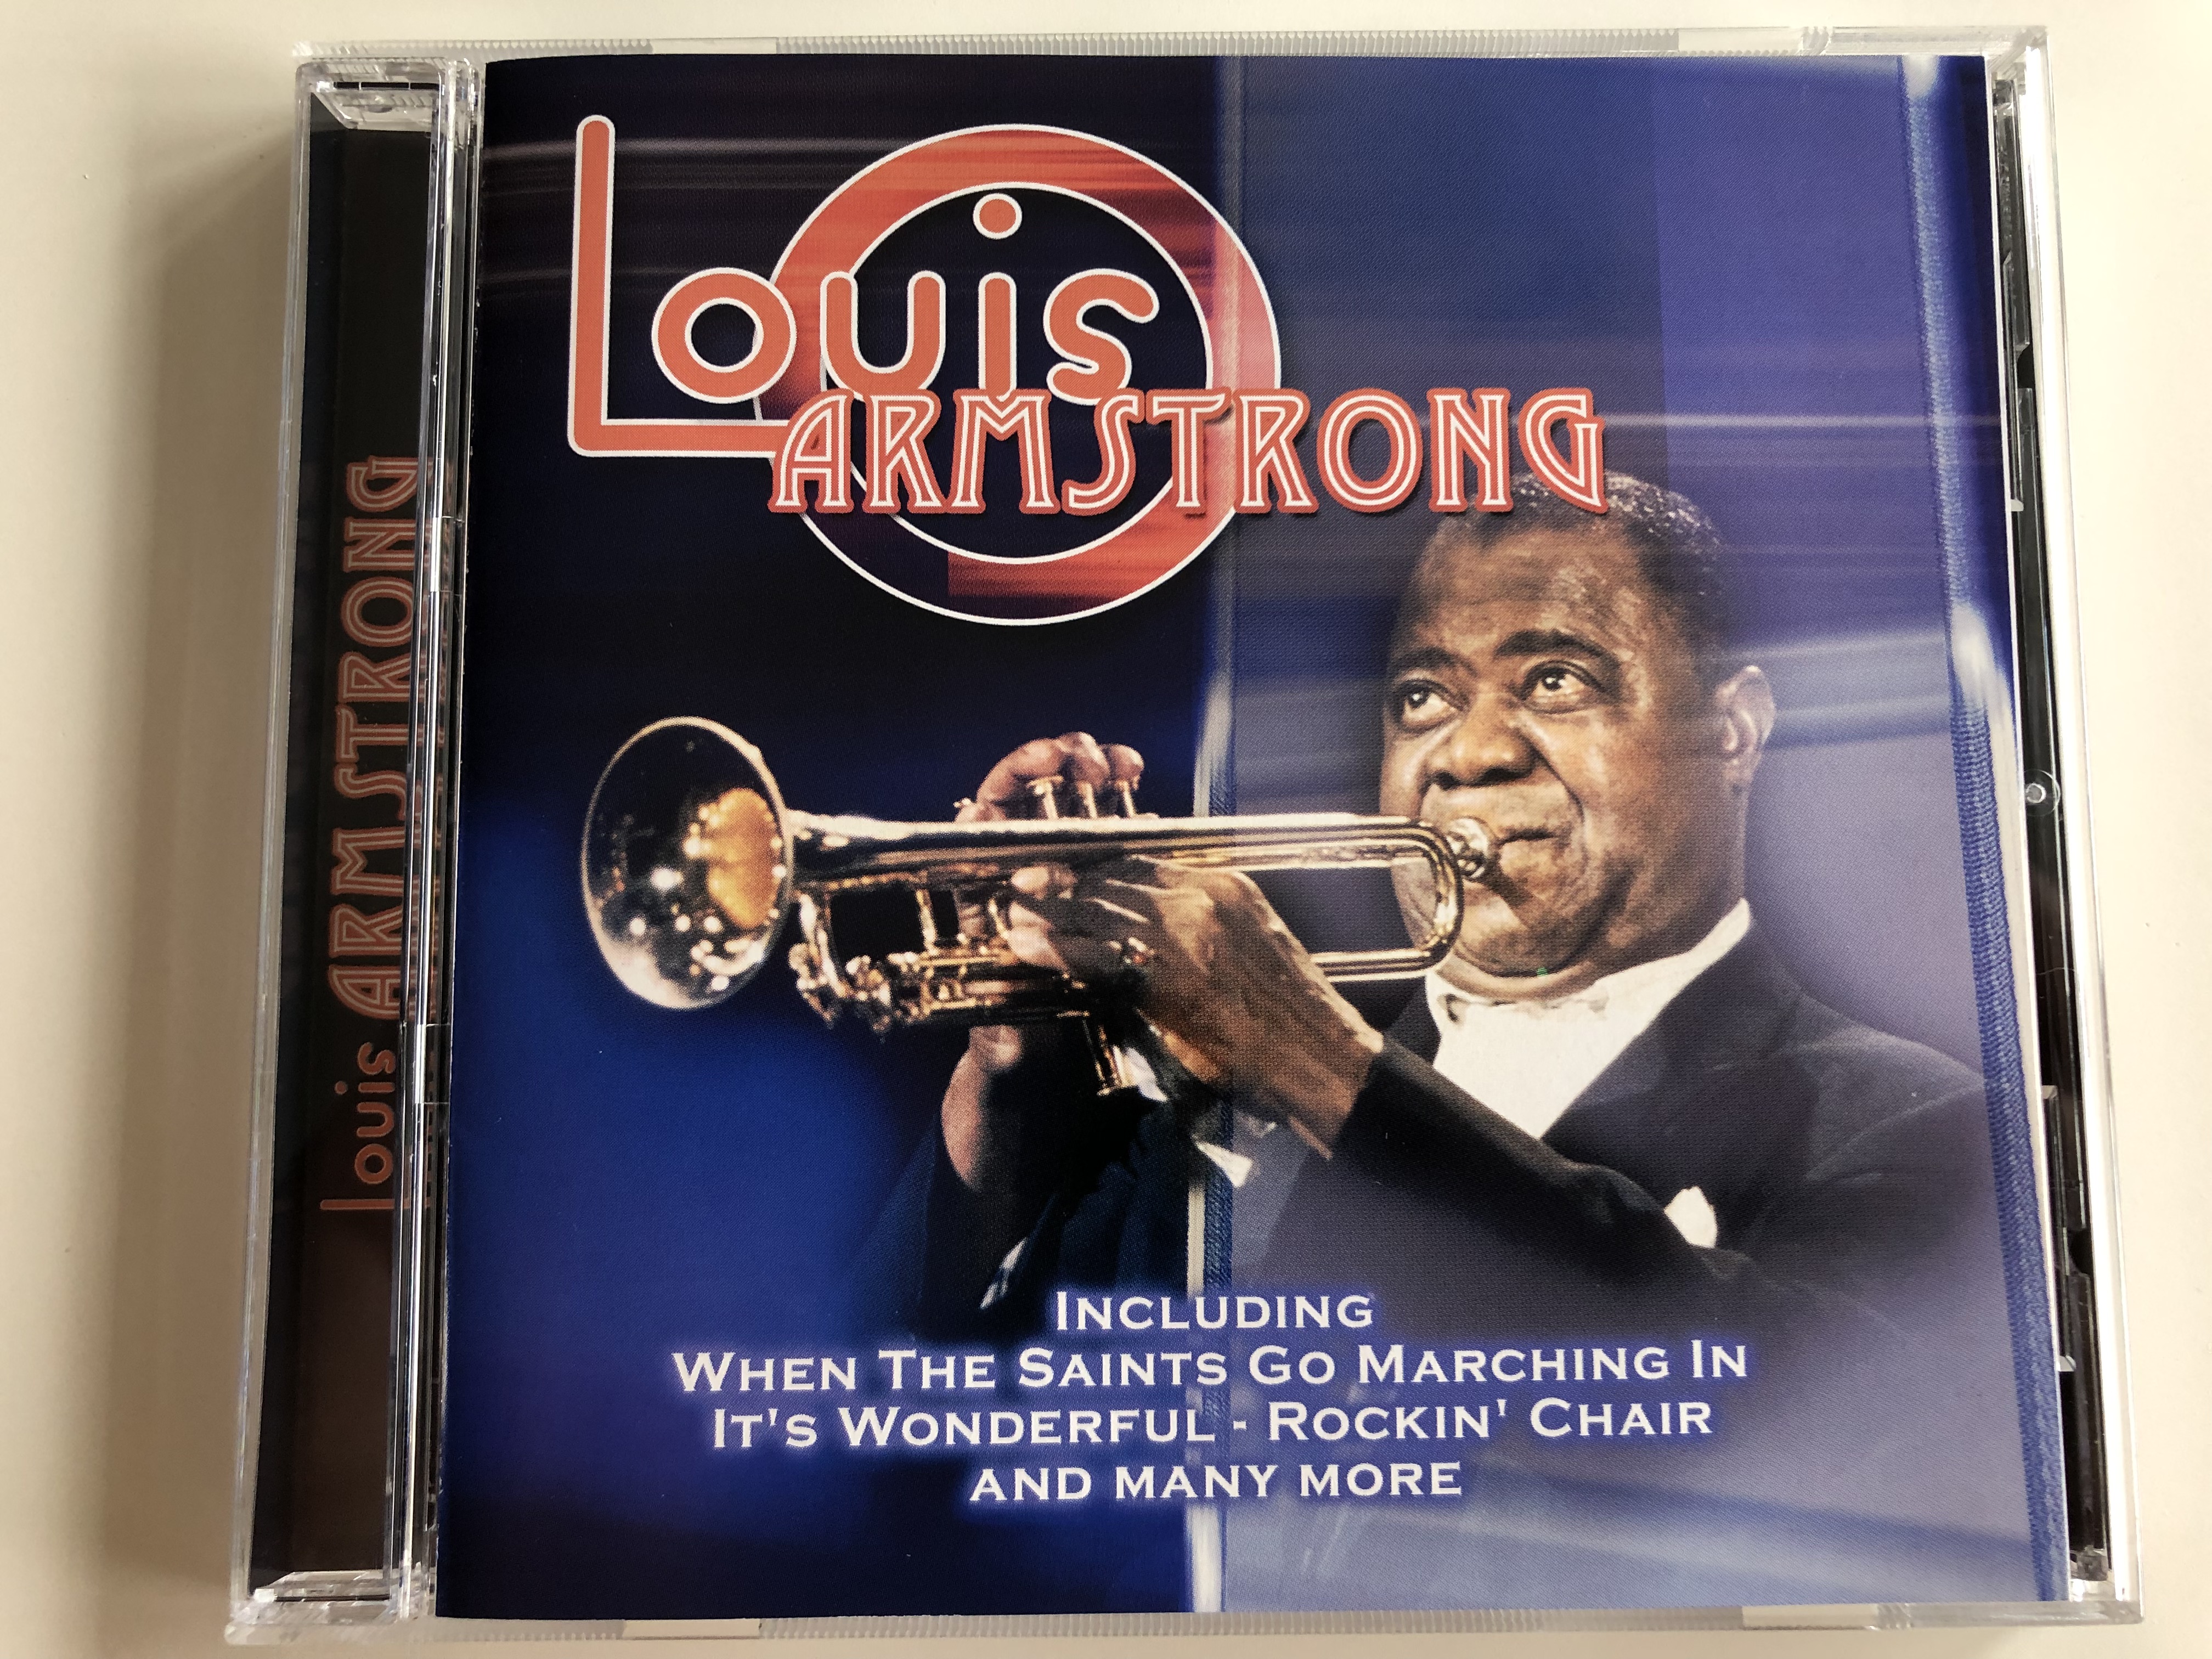 louis-armstrong-including-when-the-saints-go-marching-in-it-s-wonderful-rocking-chair-and-many-more-audio-cd-2001-musicbank-apwcd1196-1-.jpg